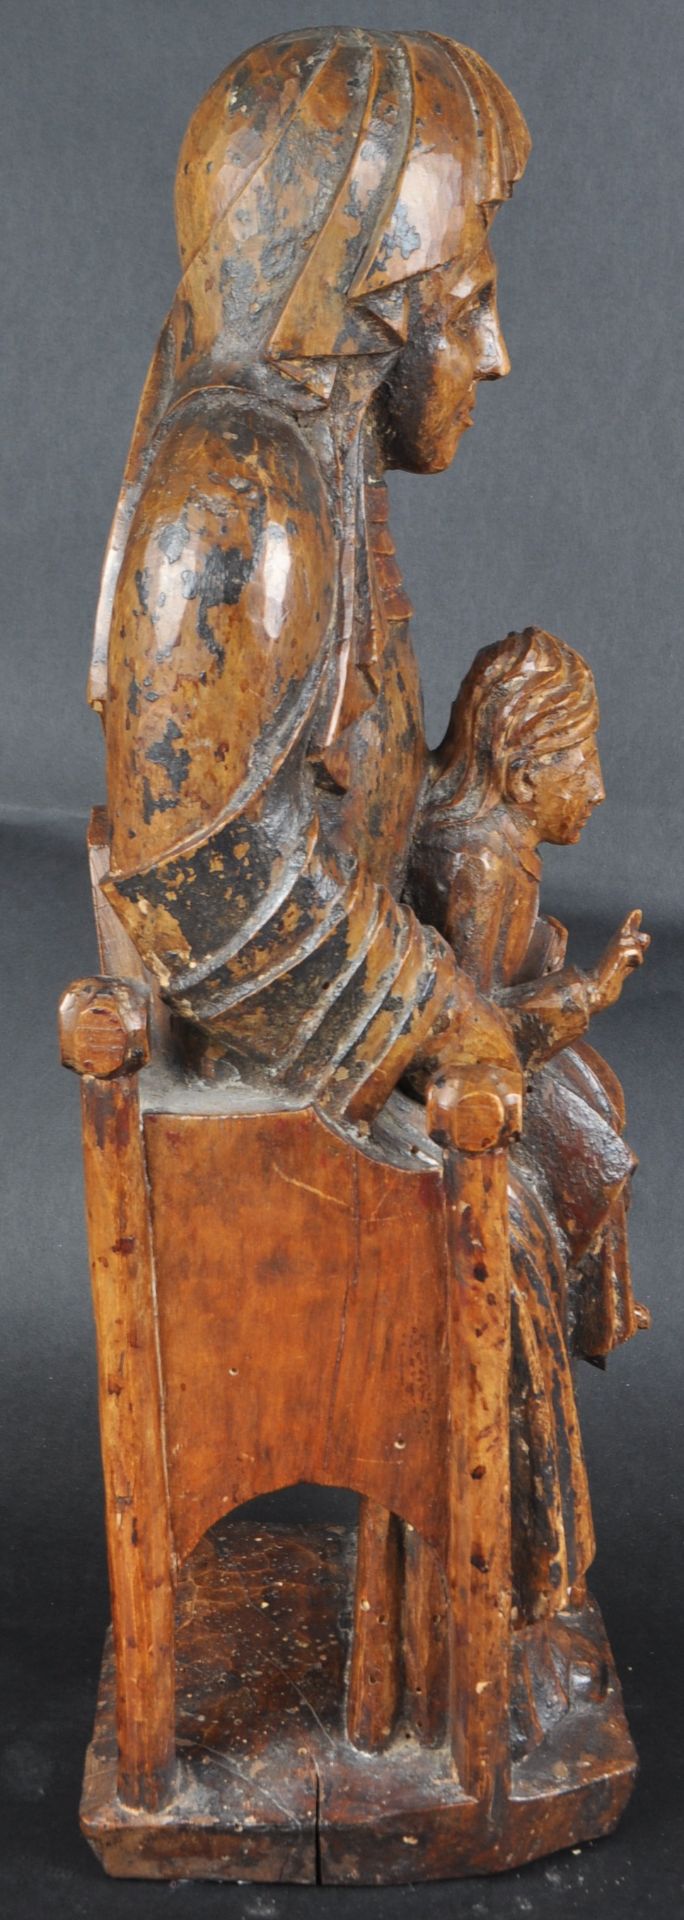 18TH CENTURY CARVED WALNUT RELIGIOUS ENTHRONED FIGURE - Image 2 of 6